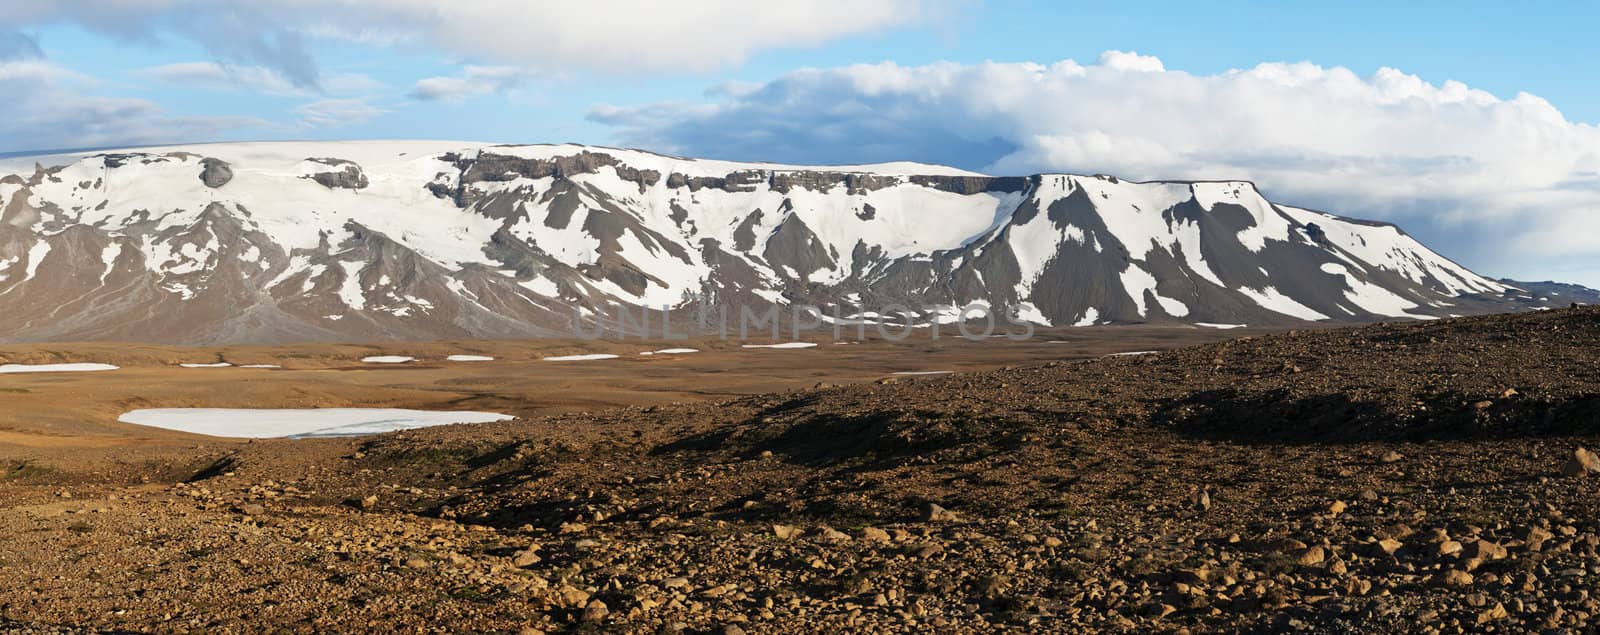 Mountains covered by icy glaciers on Iceland